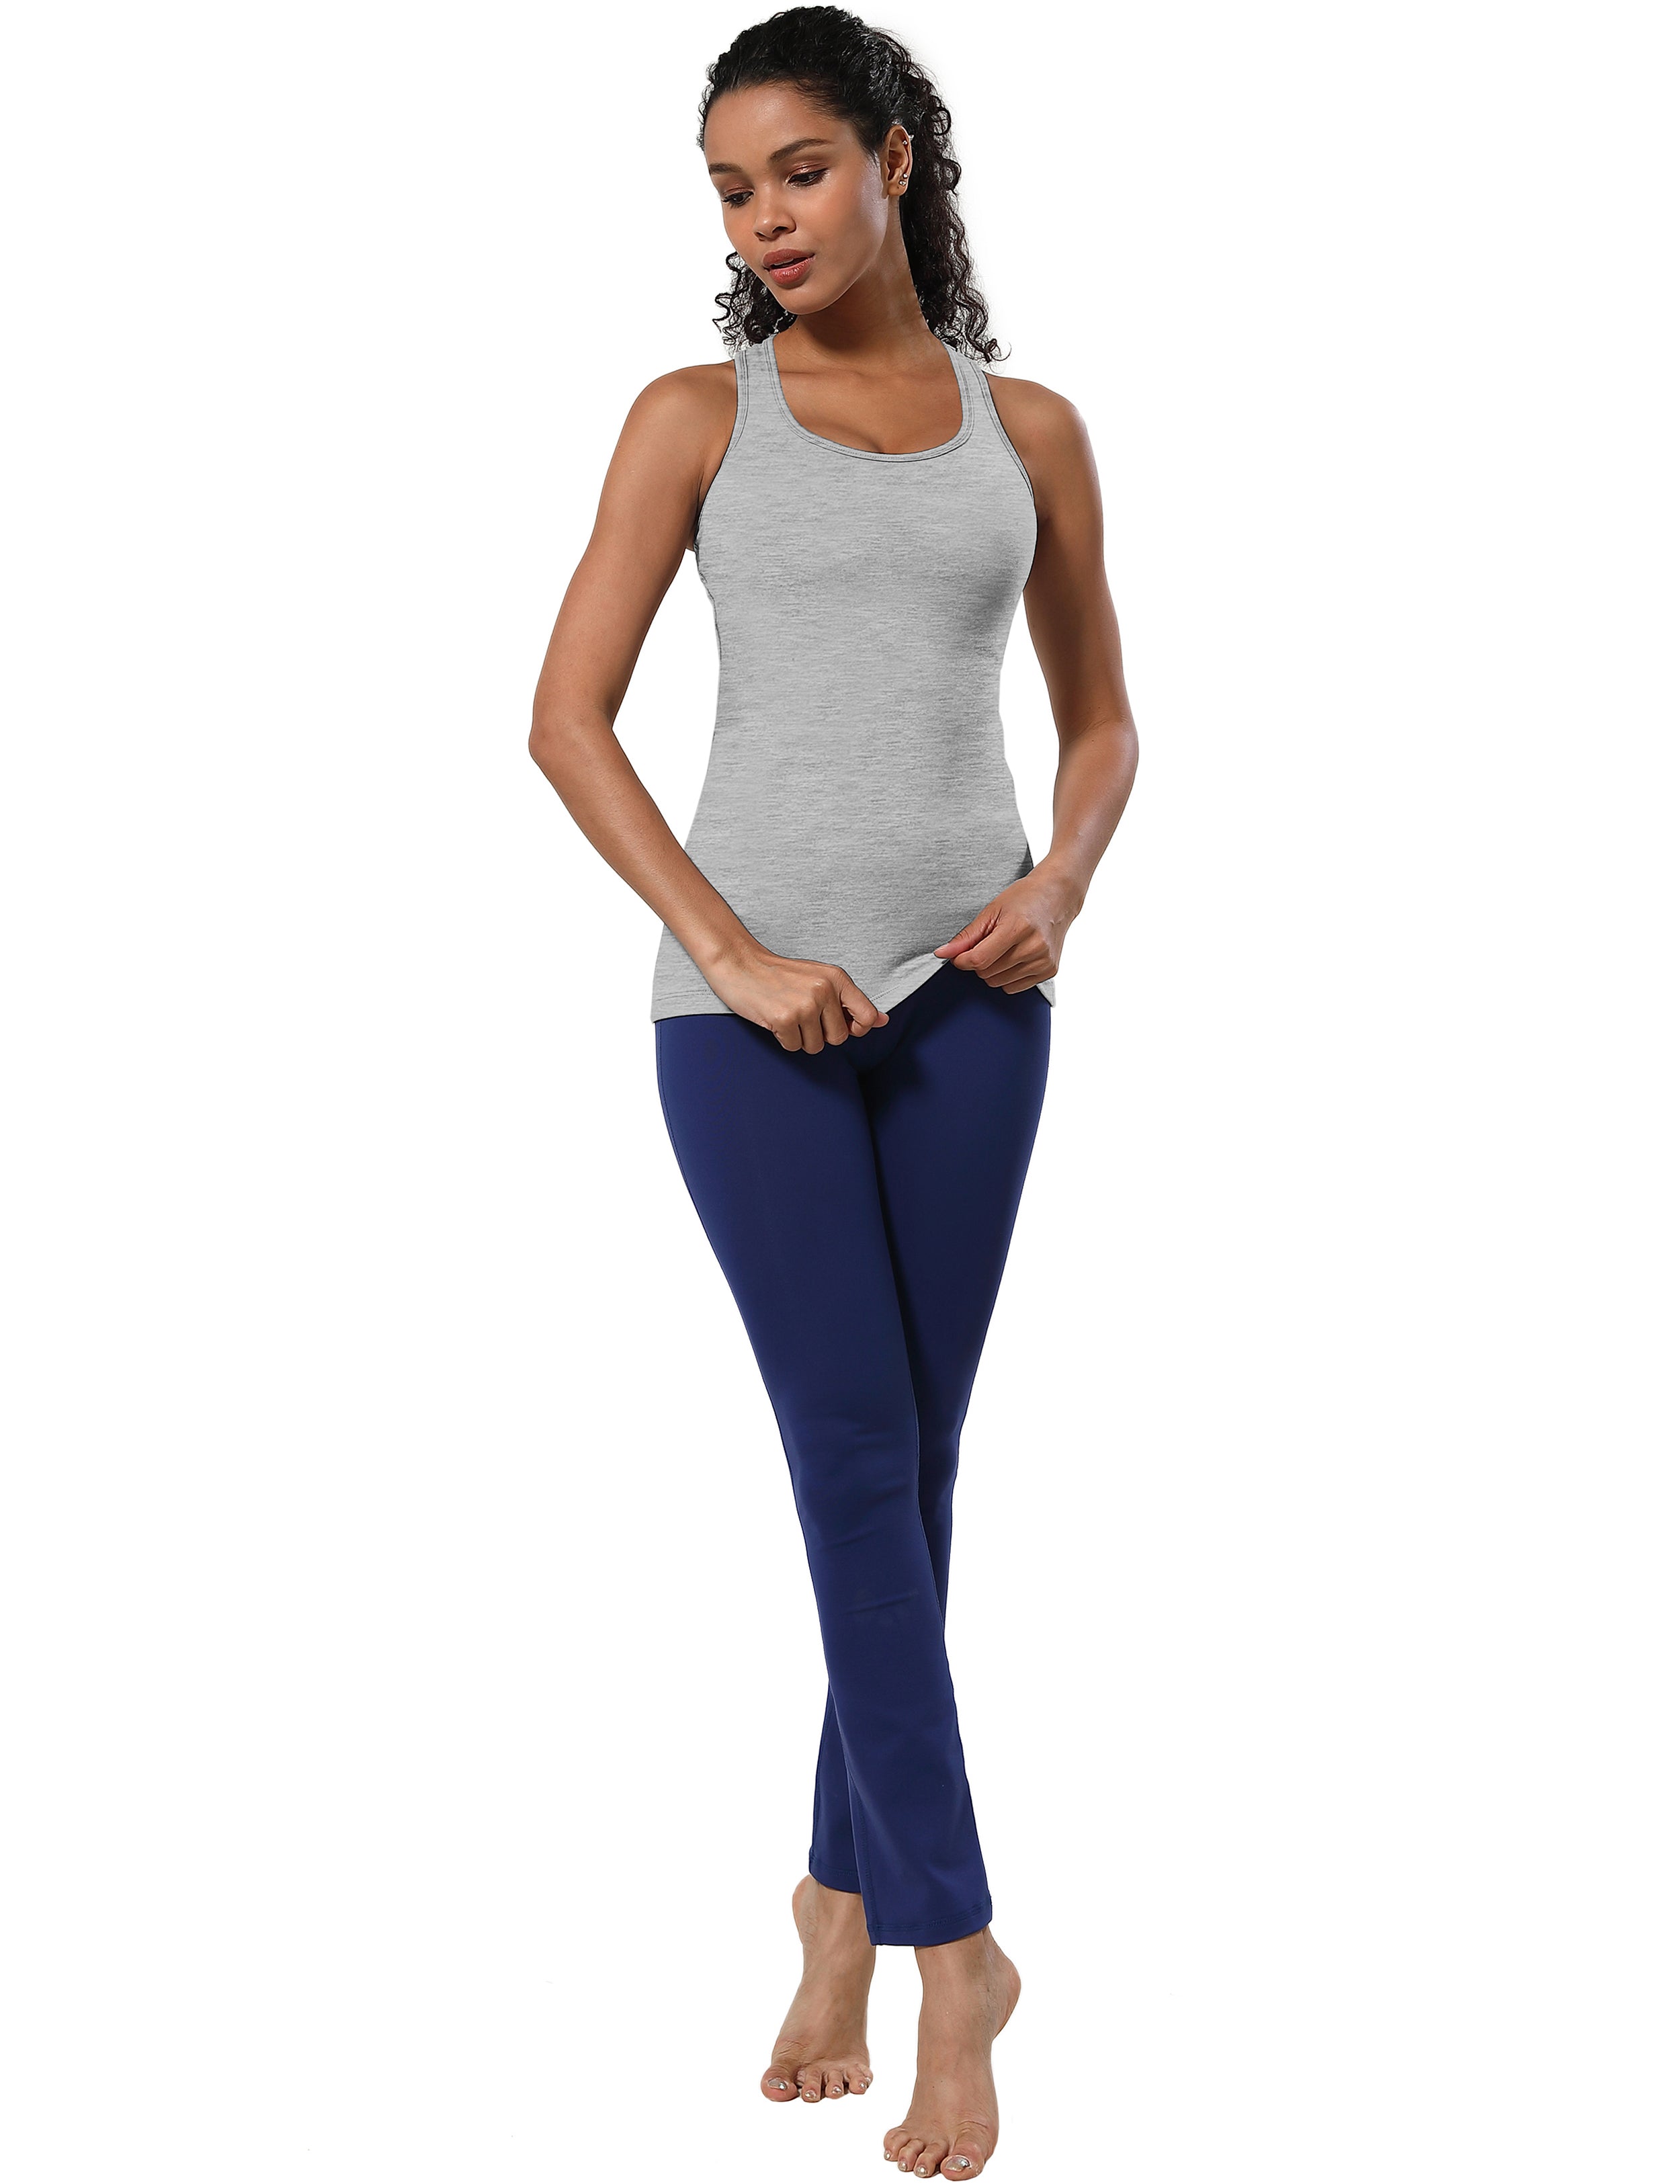 Racerback Athletic Tank Tops heathergray 92%Nylon/8%Spandex(Cotton Soft) Designed for Yoga Tight Fit So buttery soft, it feels weightless Sweat-wicking Four-way stretch Breathable Contours your body Sits below the waistband for moderate, everyday coverage